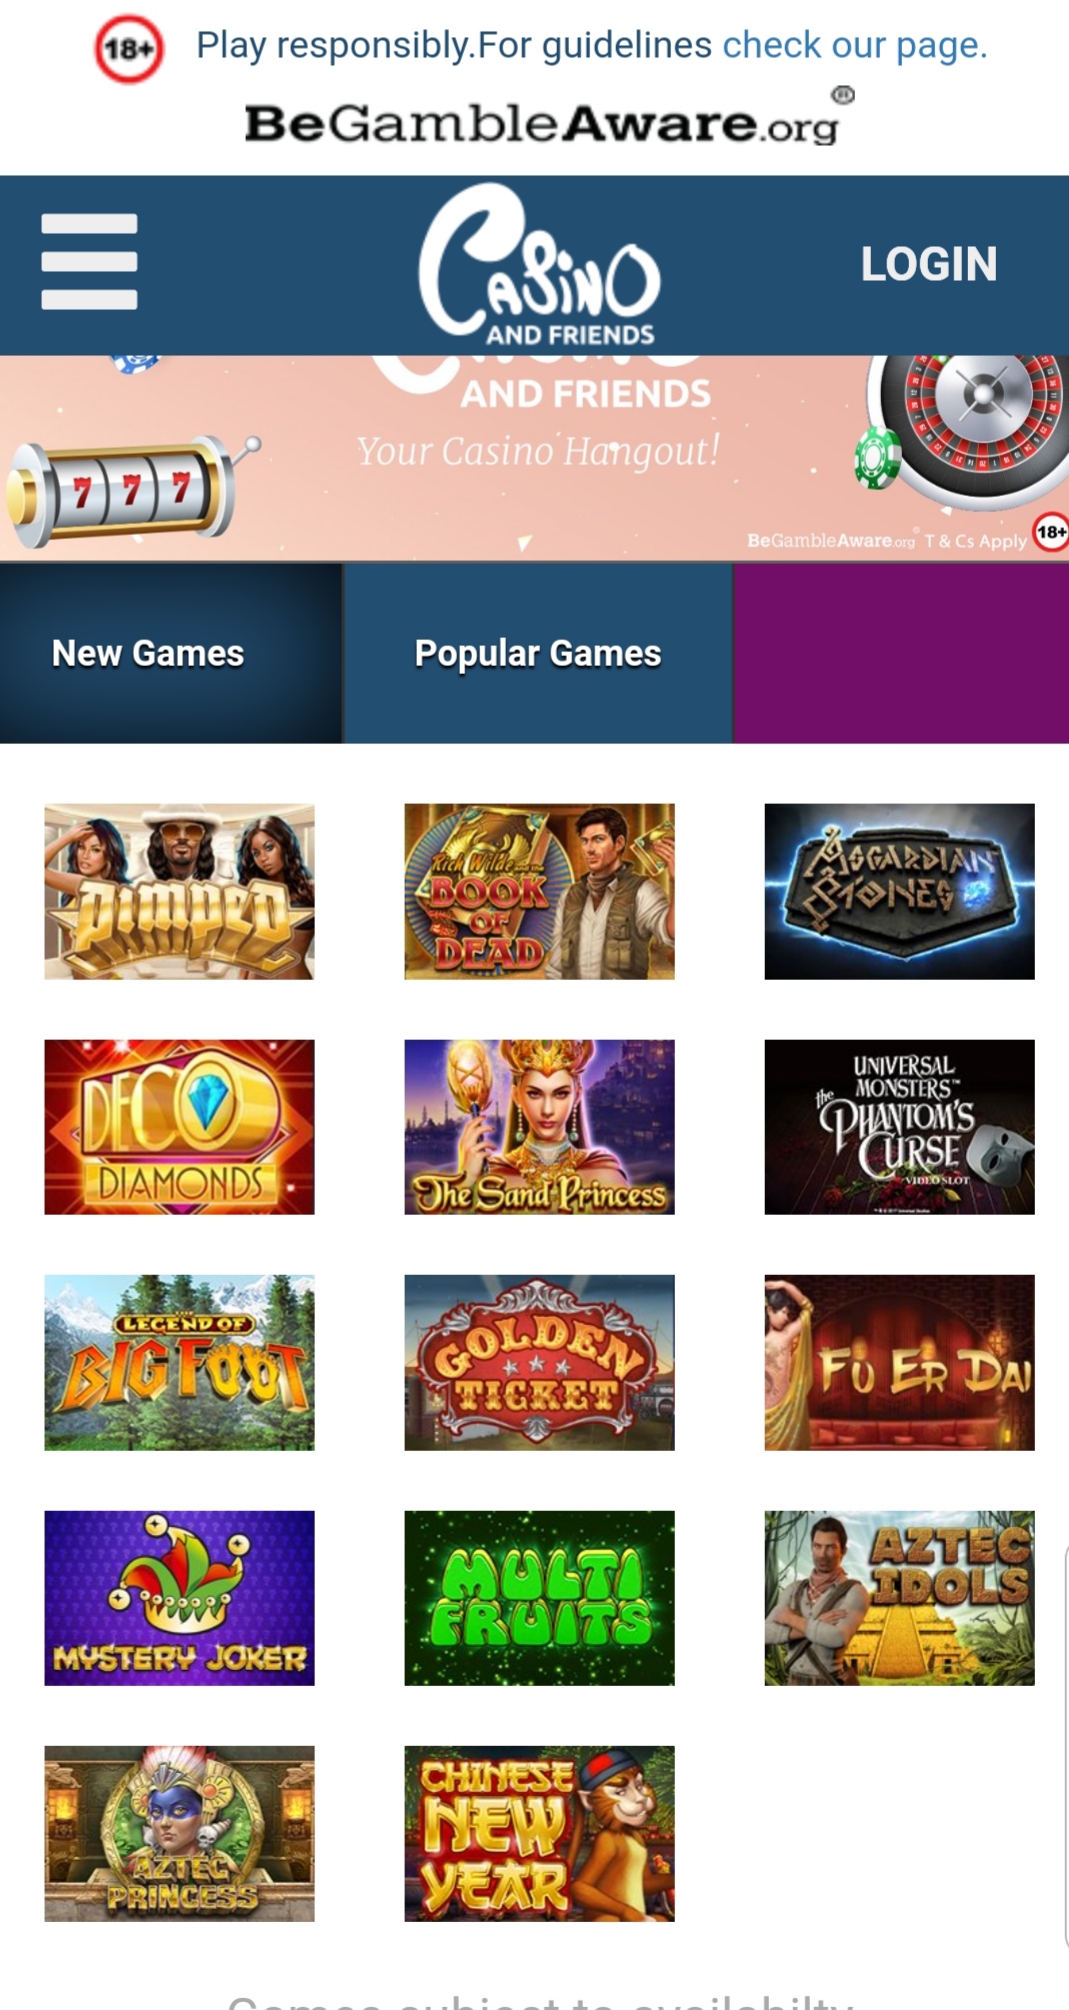 Casino and Friends Mobile Games Review